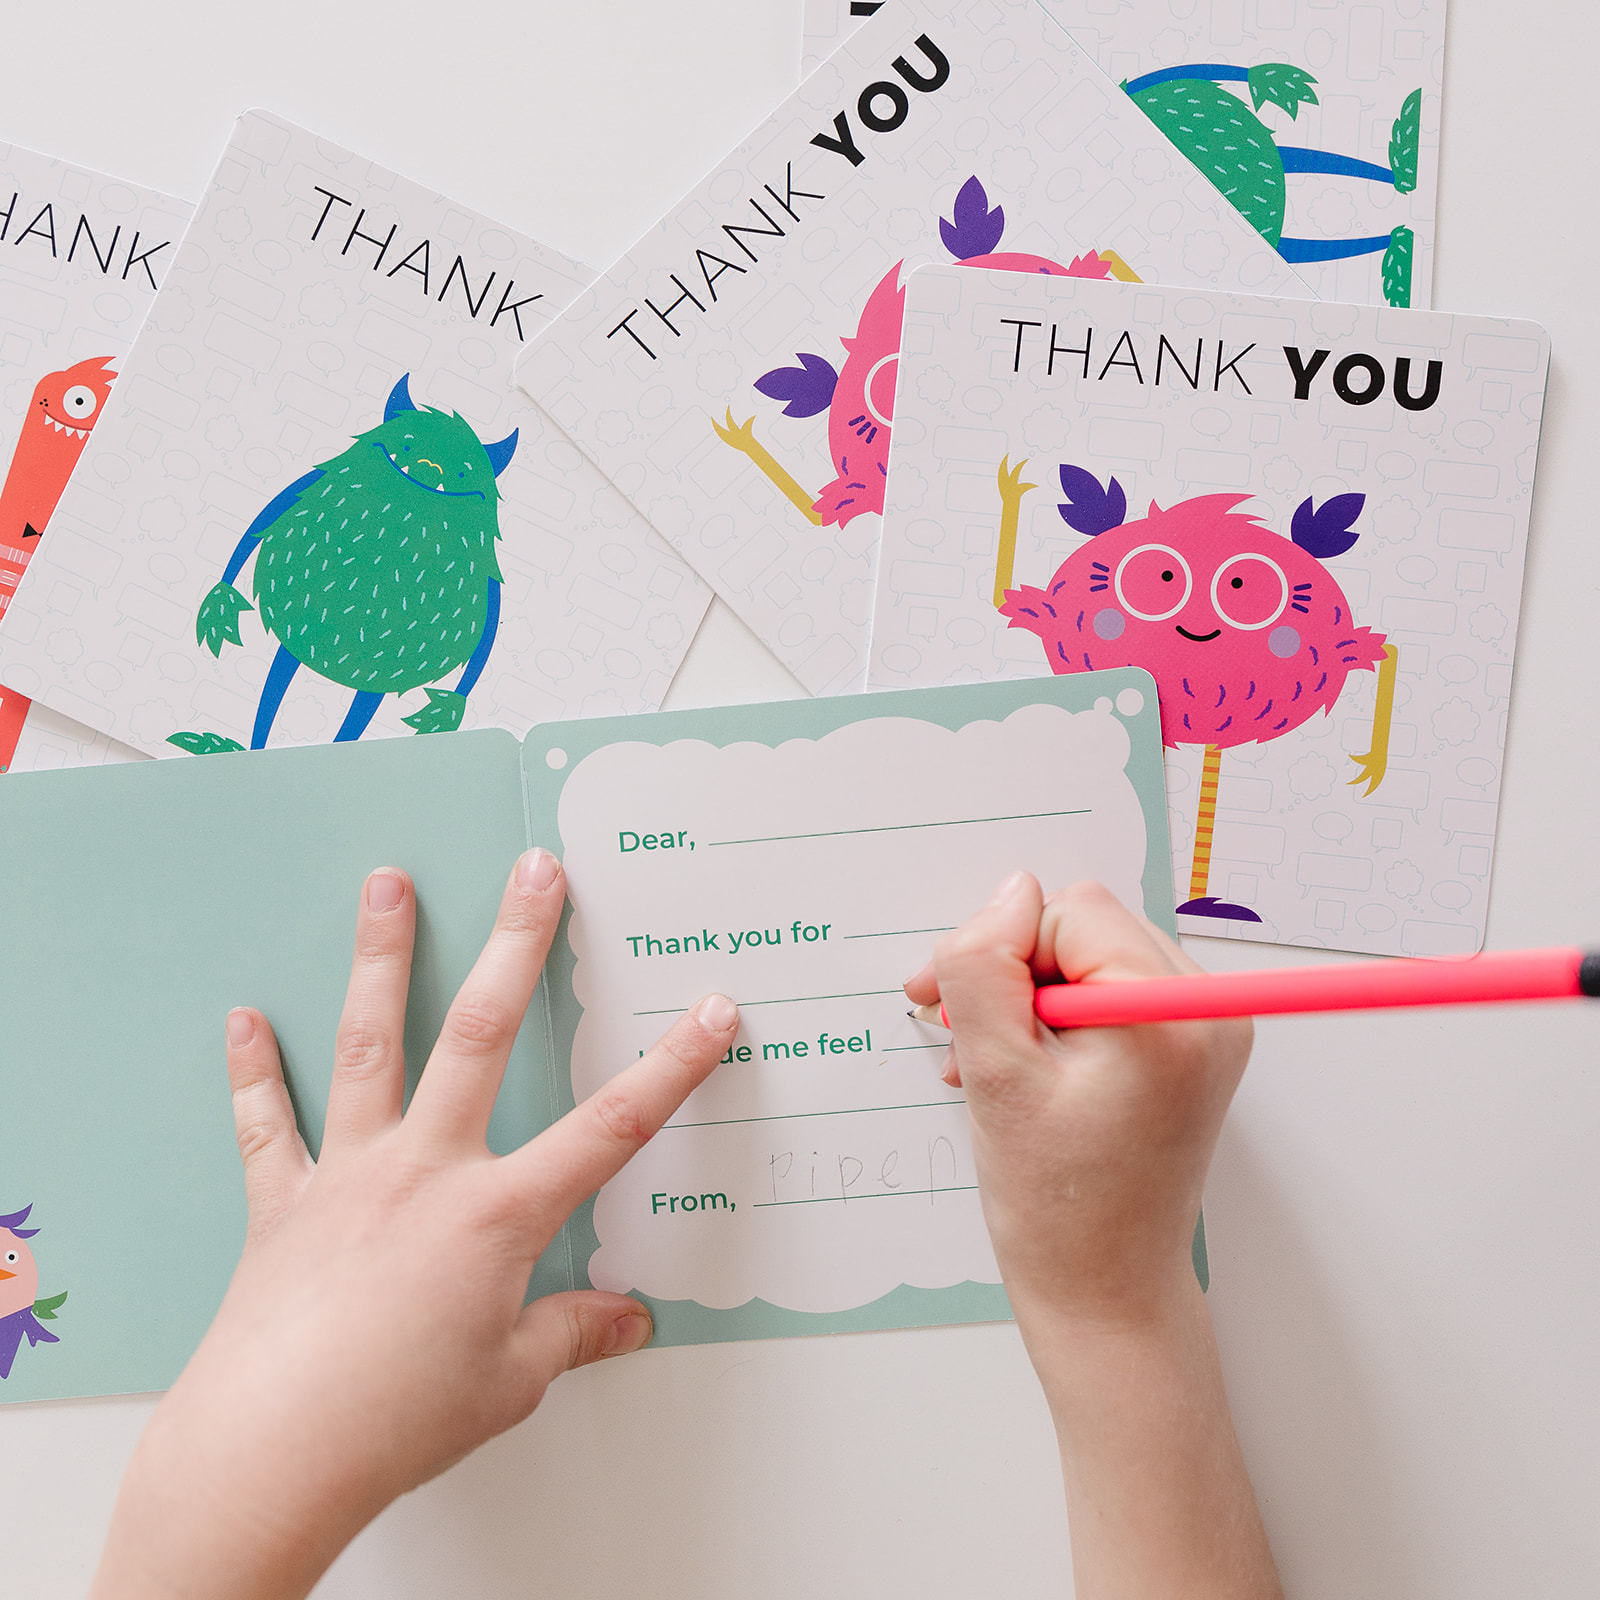 Manners&Co. Thank You Cards